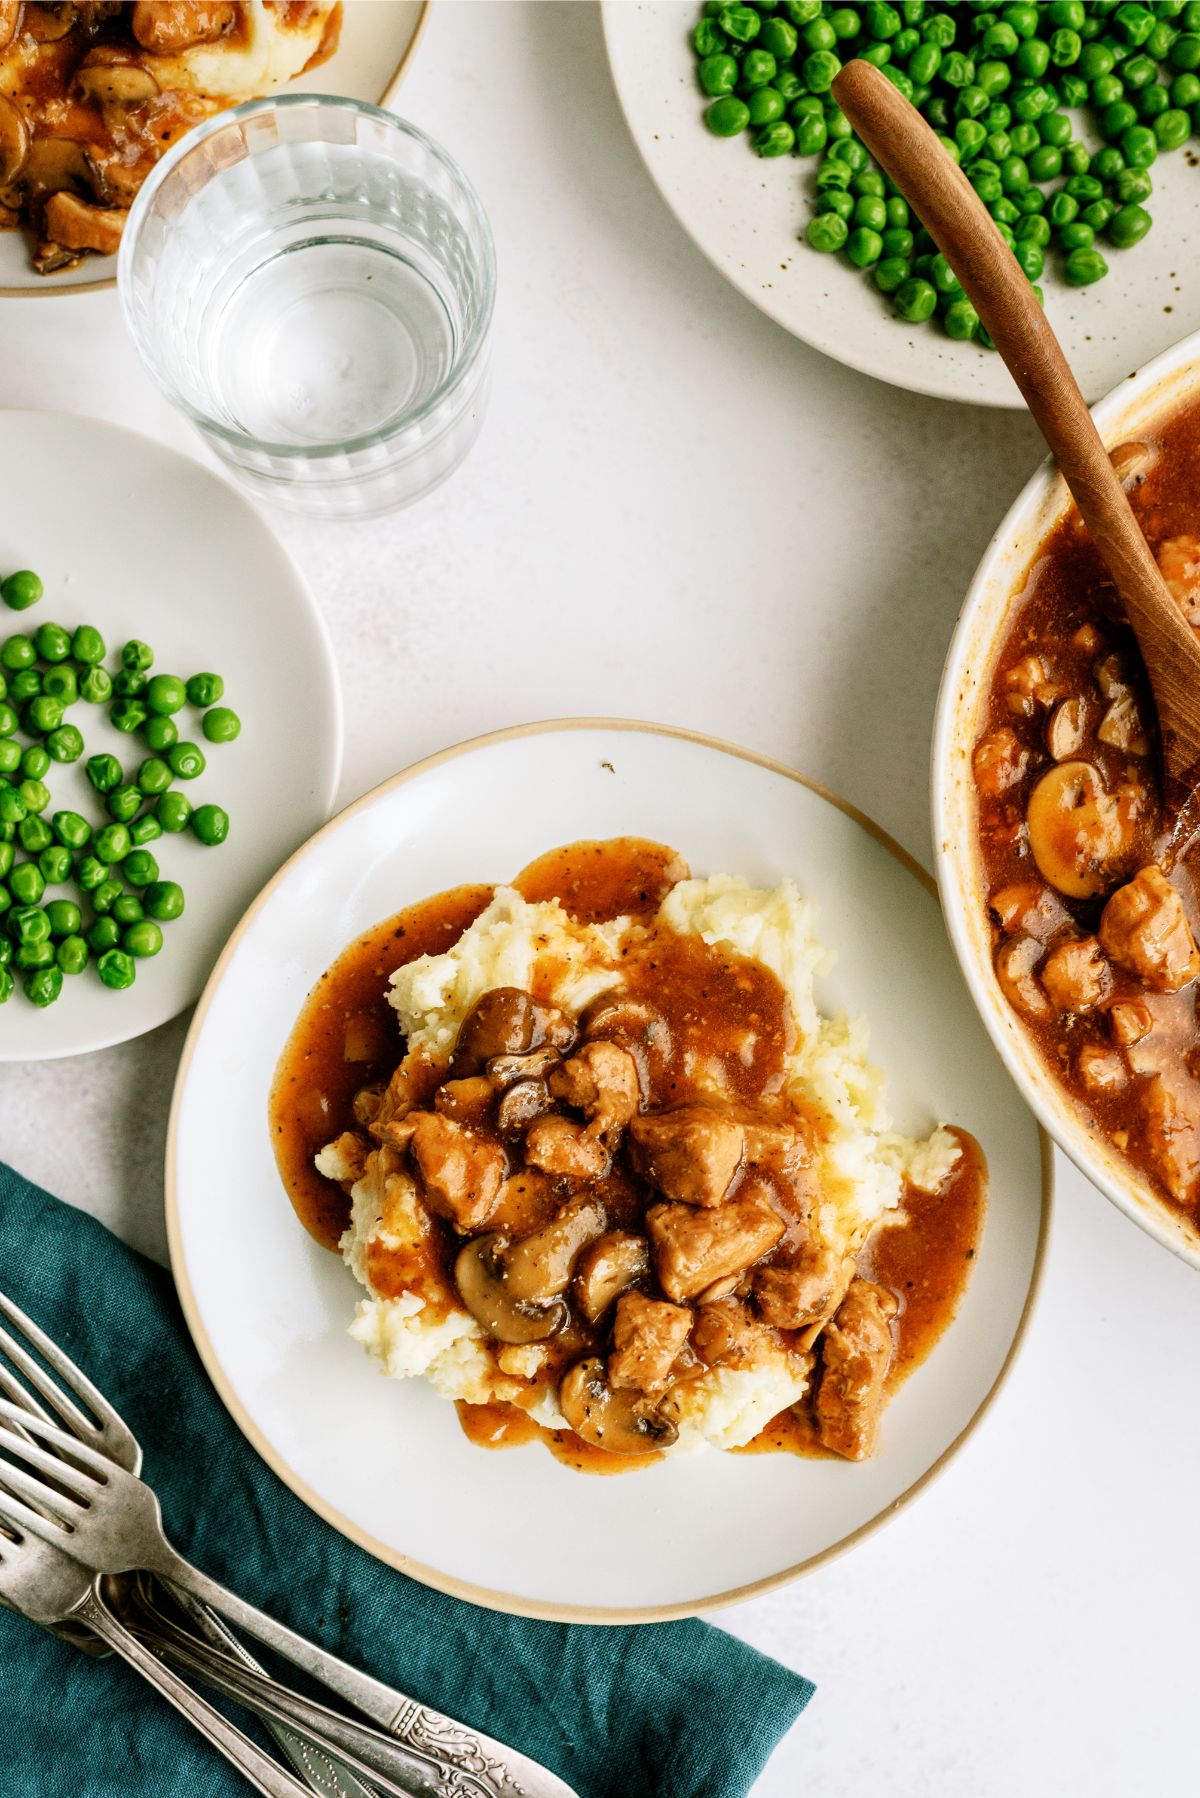 Top view of Instant Pot Pork Tips and Gravy served over a plate of mashed potatoes